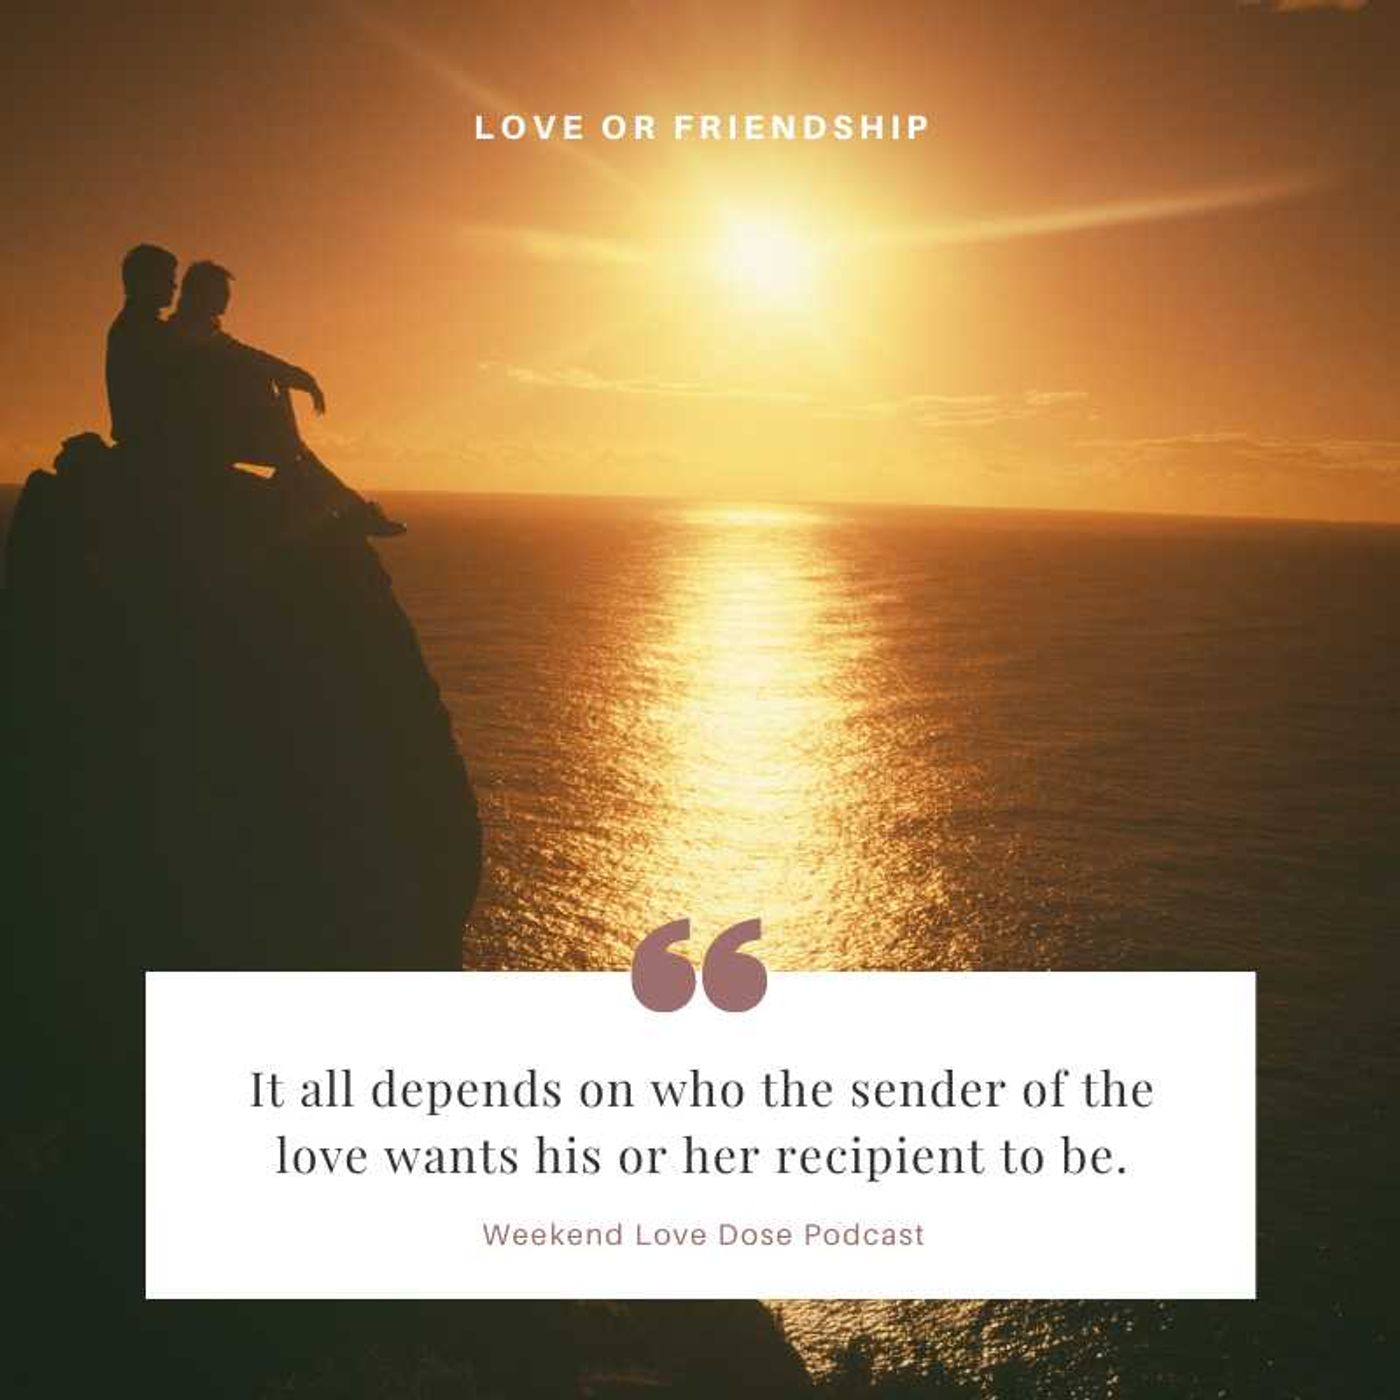 Love or Friendship? Which would you pick? Image